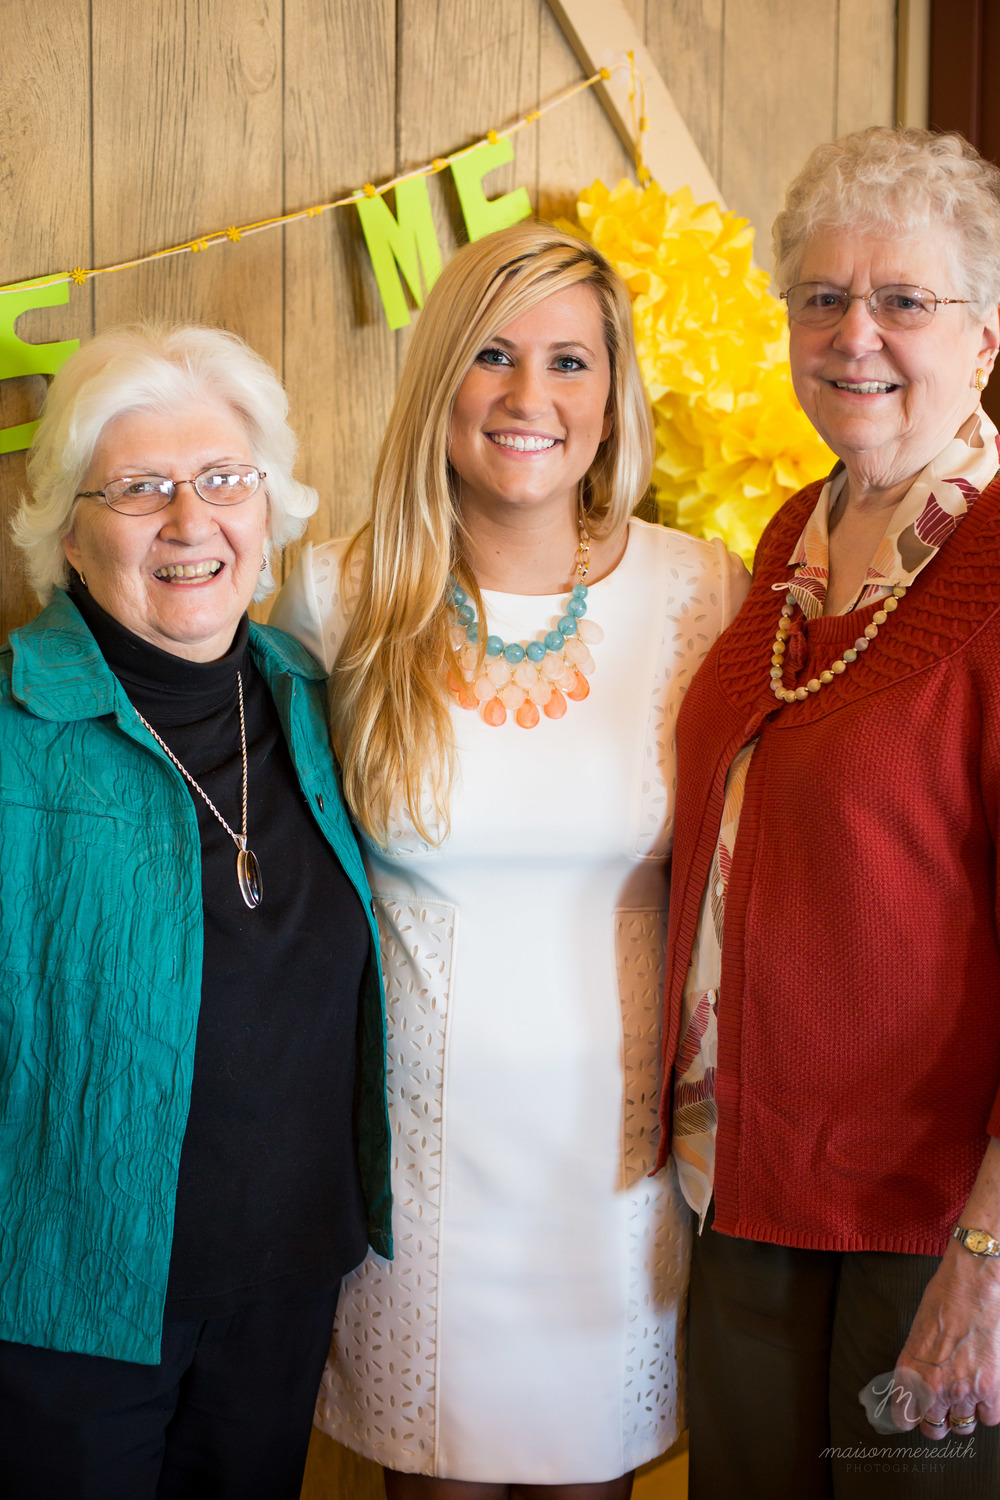 Love this shot with both of Kim's grandmas : ) This will be such a special memory!